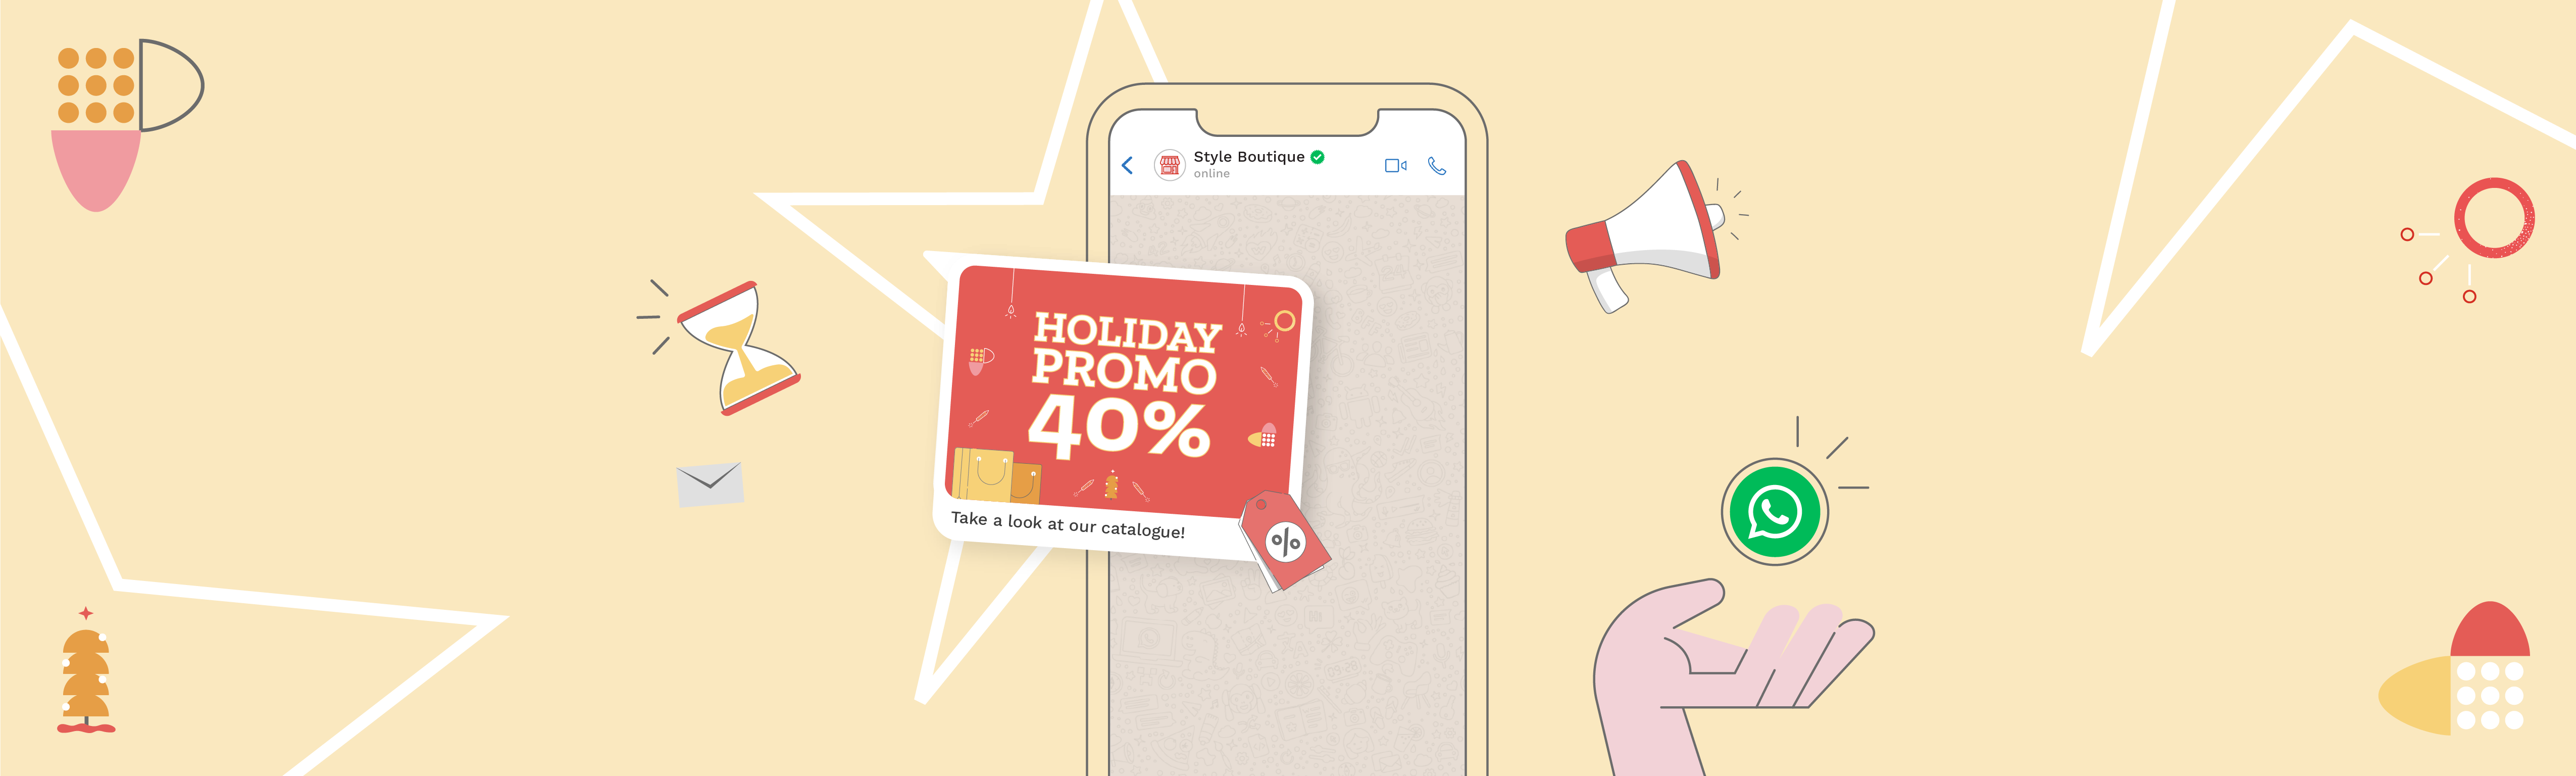 WhatsAPp campaigns for holiday marketing